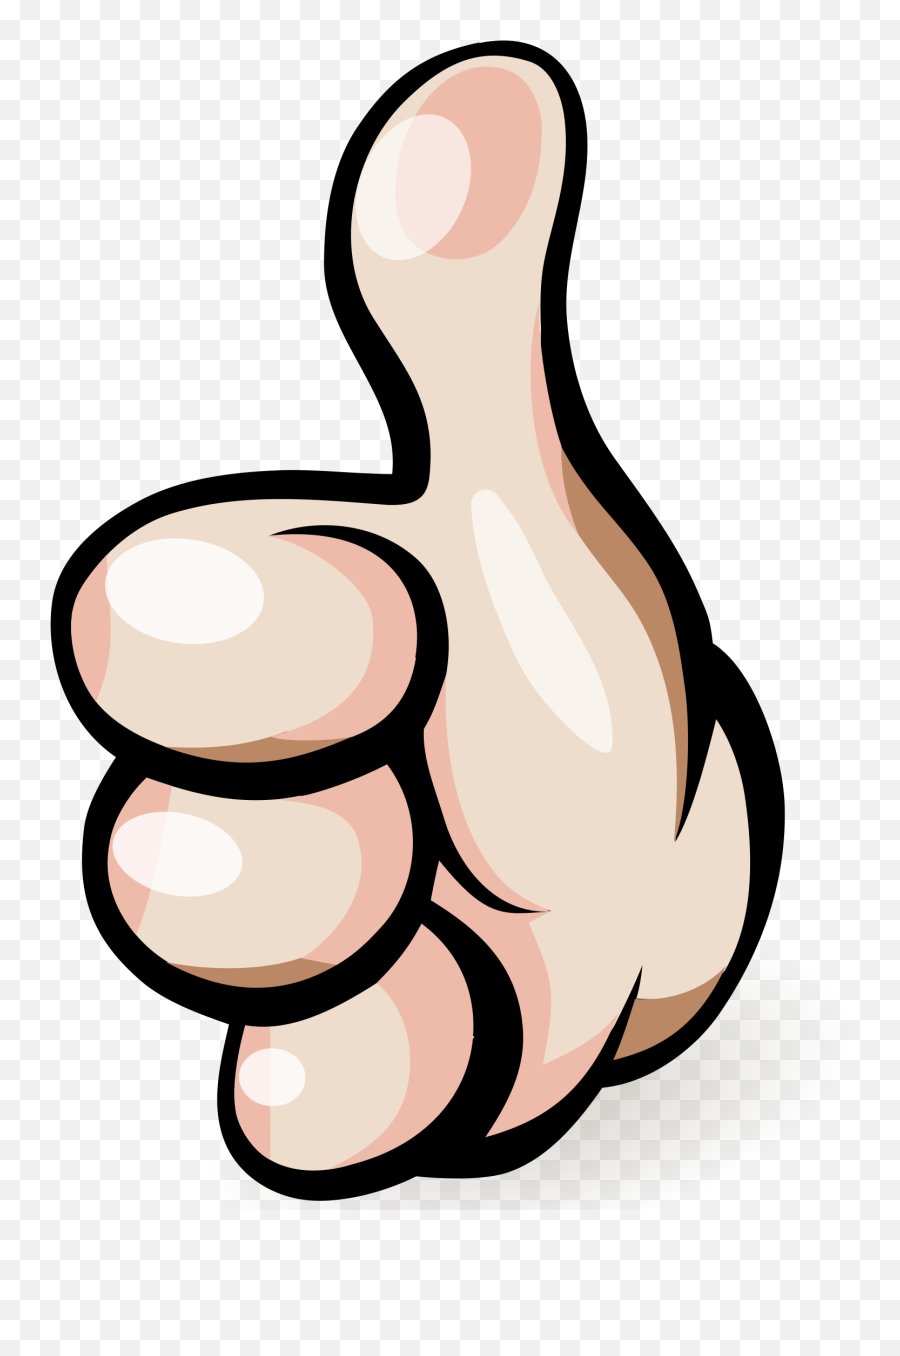 Positive Clipart Thumbs Down Positive Thumbs Down - Thumbs Up Png Icon Emoji,Thumbs Down Emoji Transparent